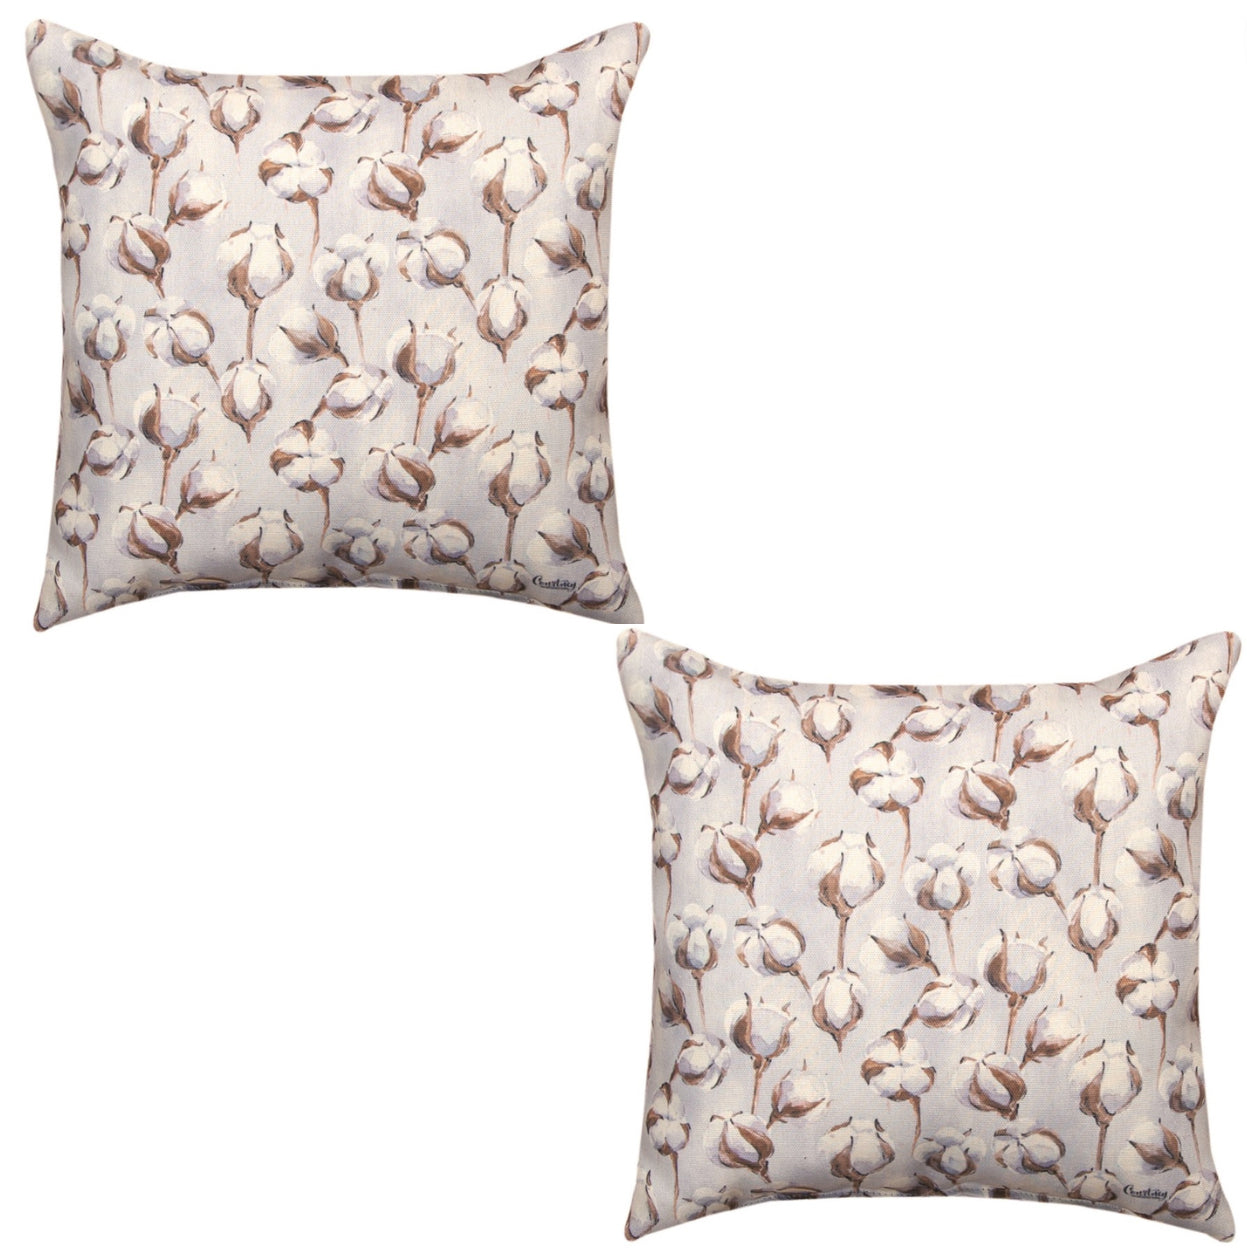 Set of 2 Indoor/Outdoor Climaweave Pillows